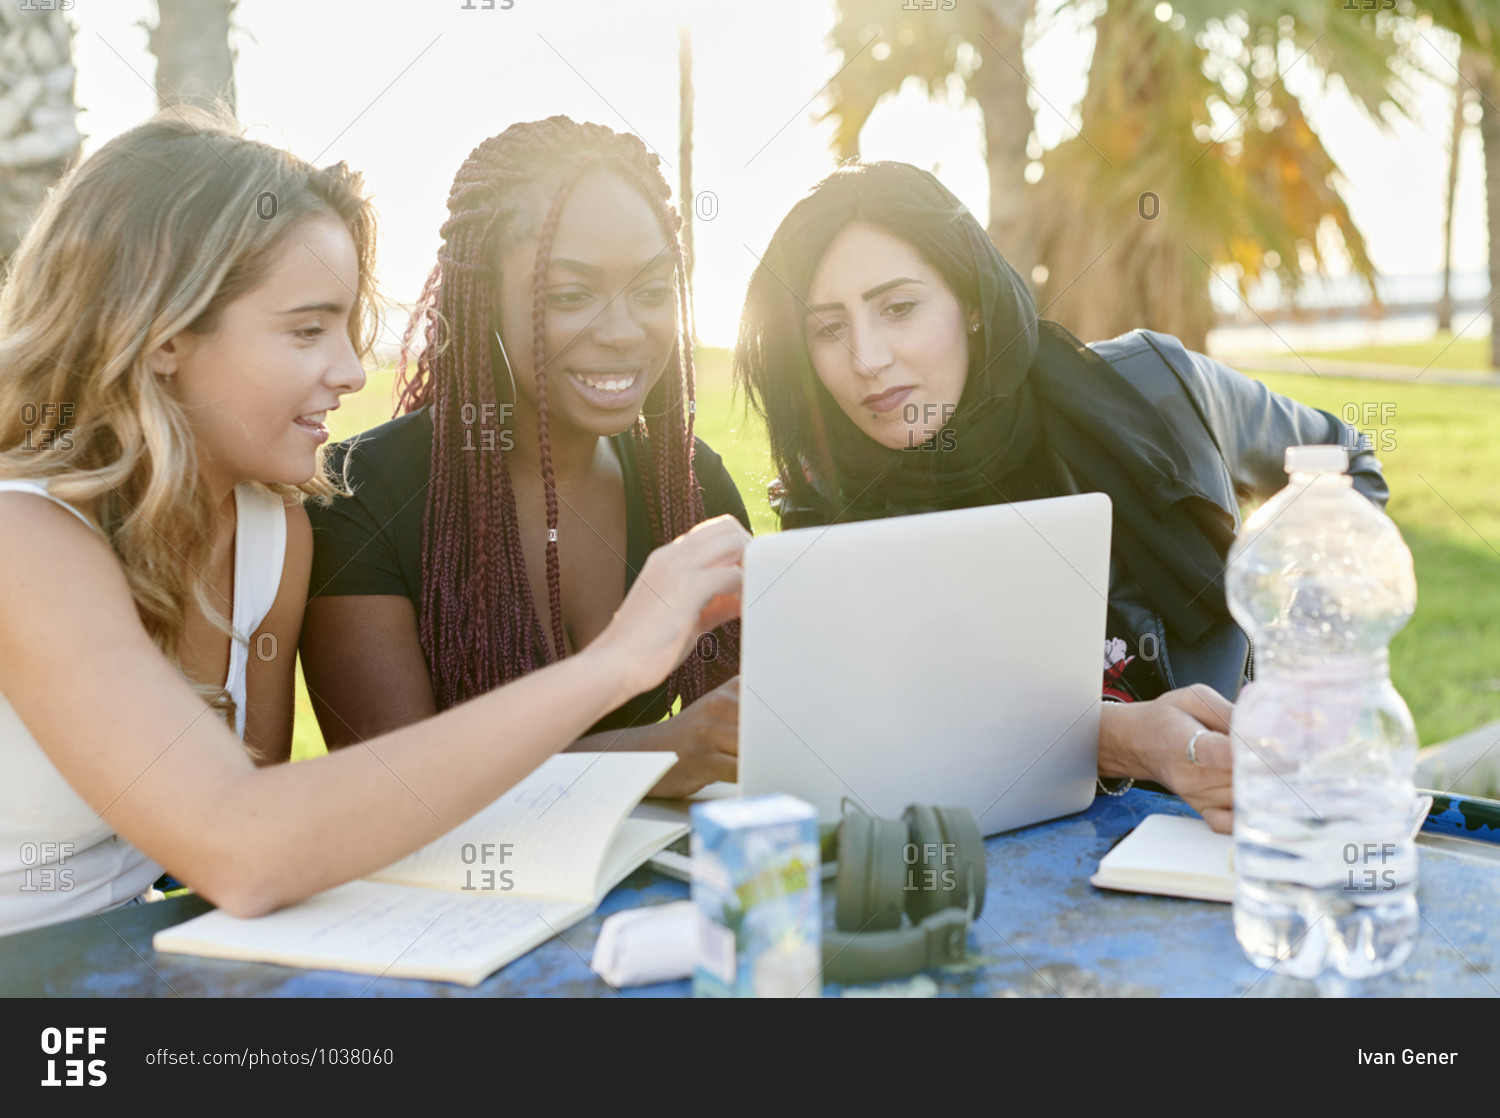 Smiling group of diverse young female university students studying together outside in a park in the afternoon